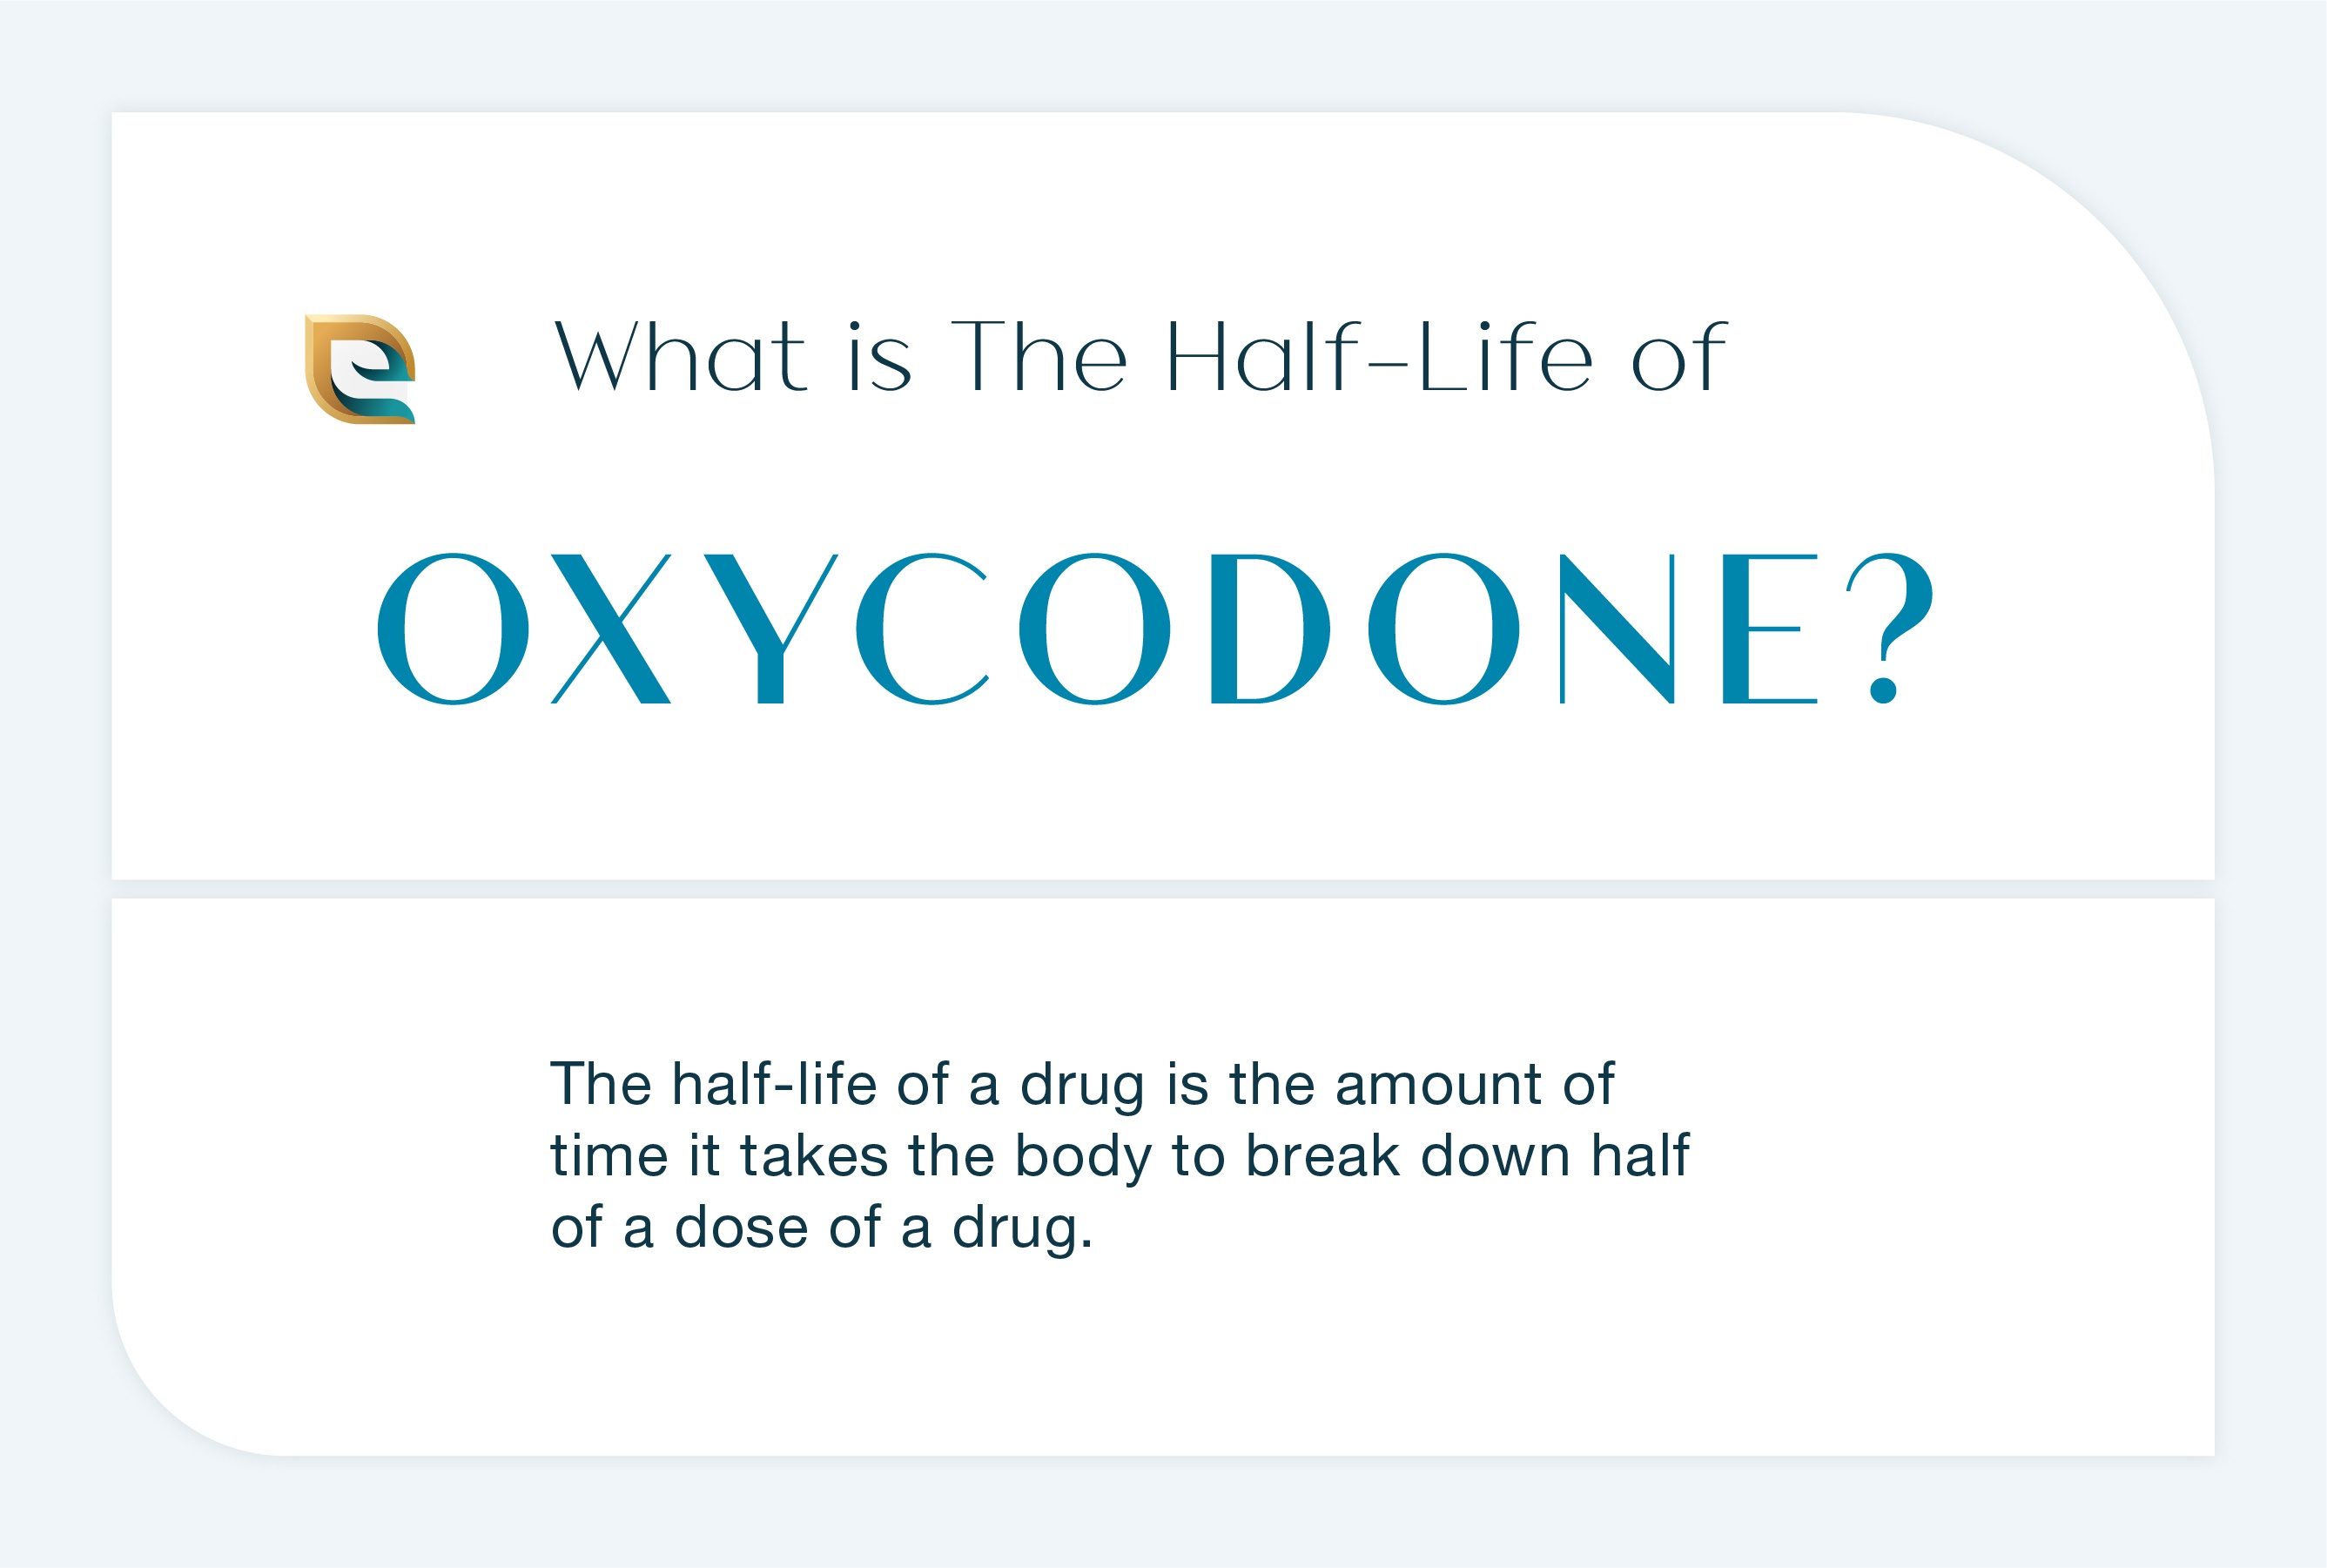 What is the half life of Oxycodone? This image describes the half life of Oxycodone